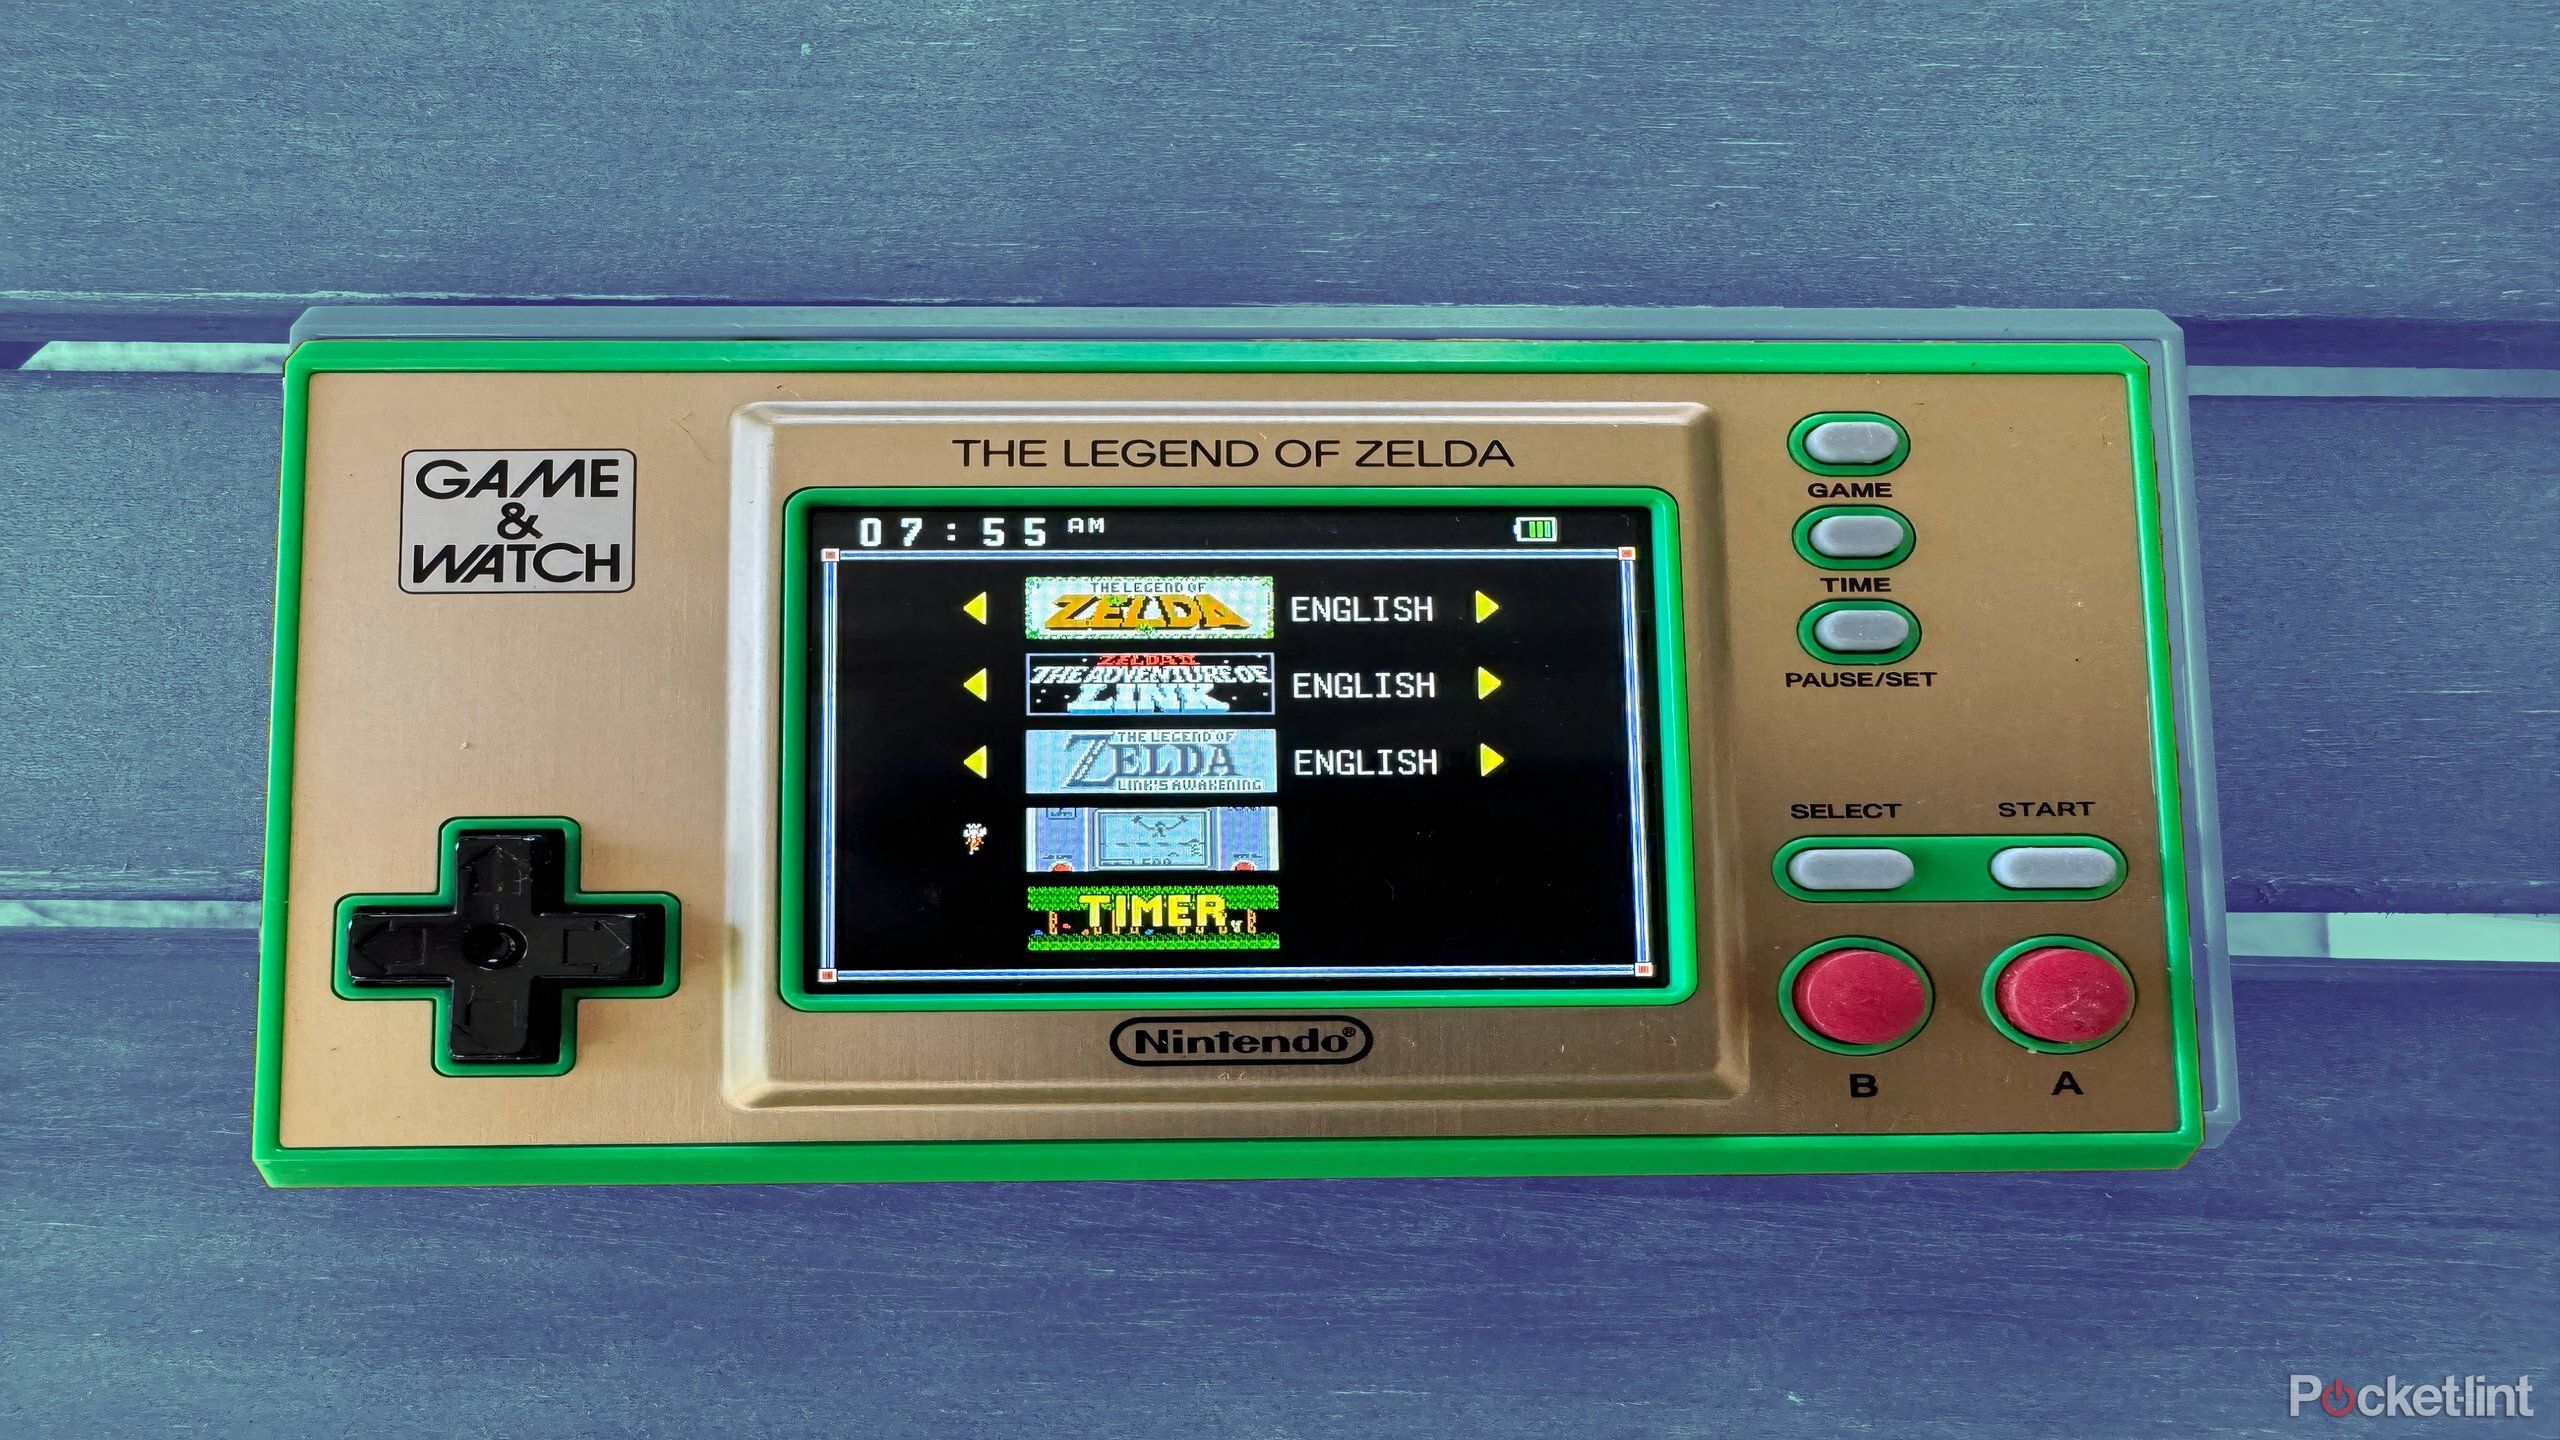 game and watch legend of zelda console